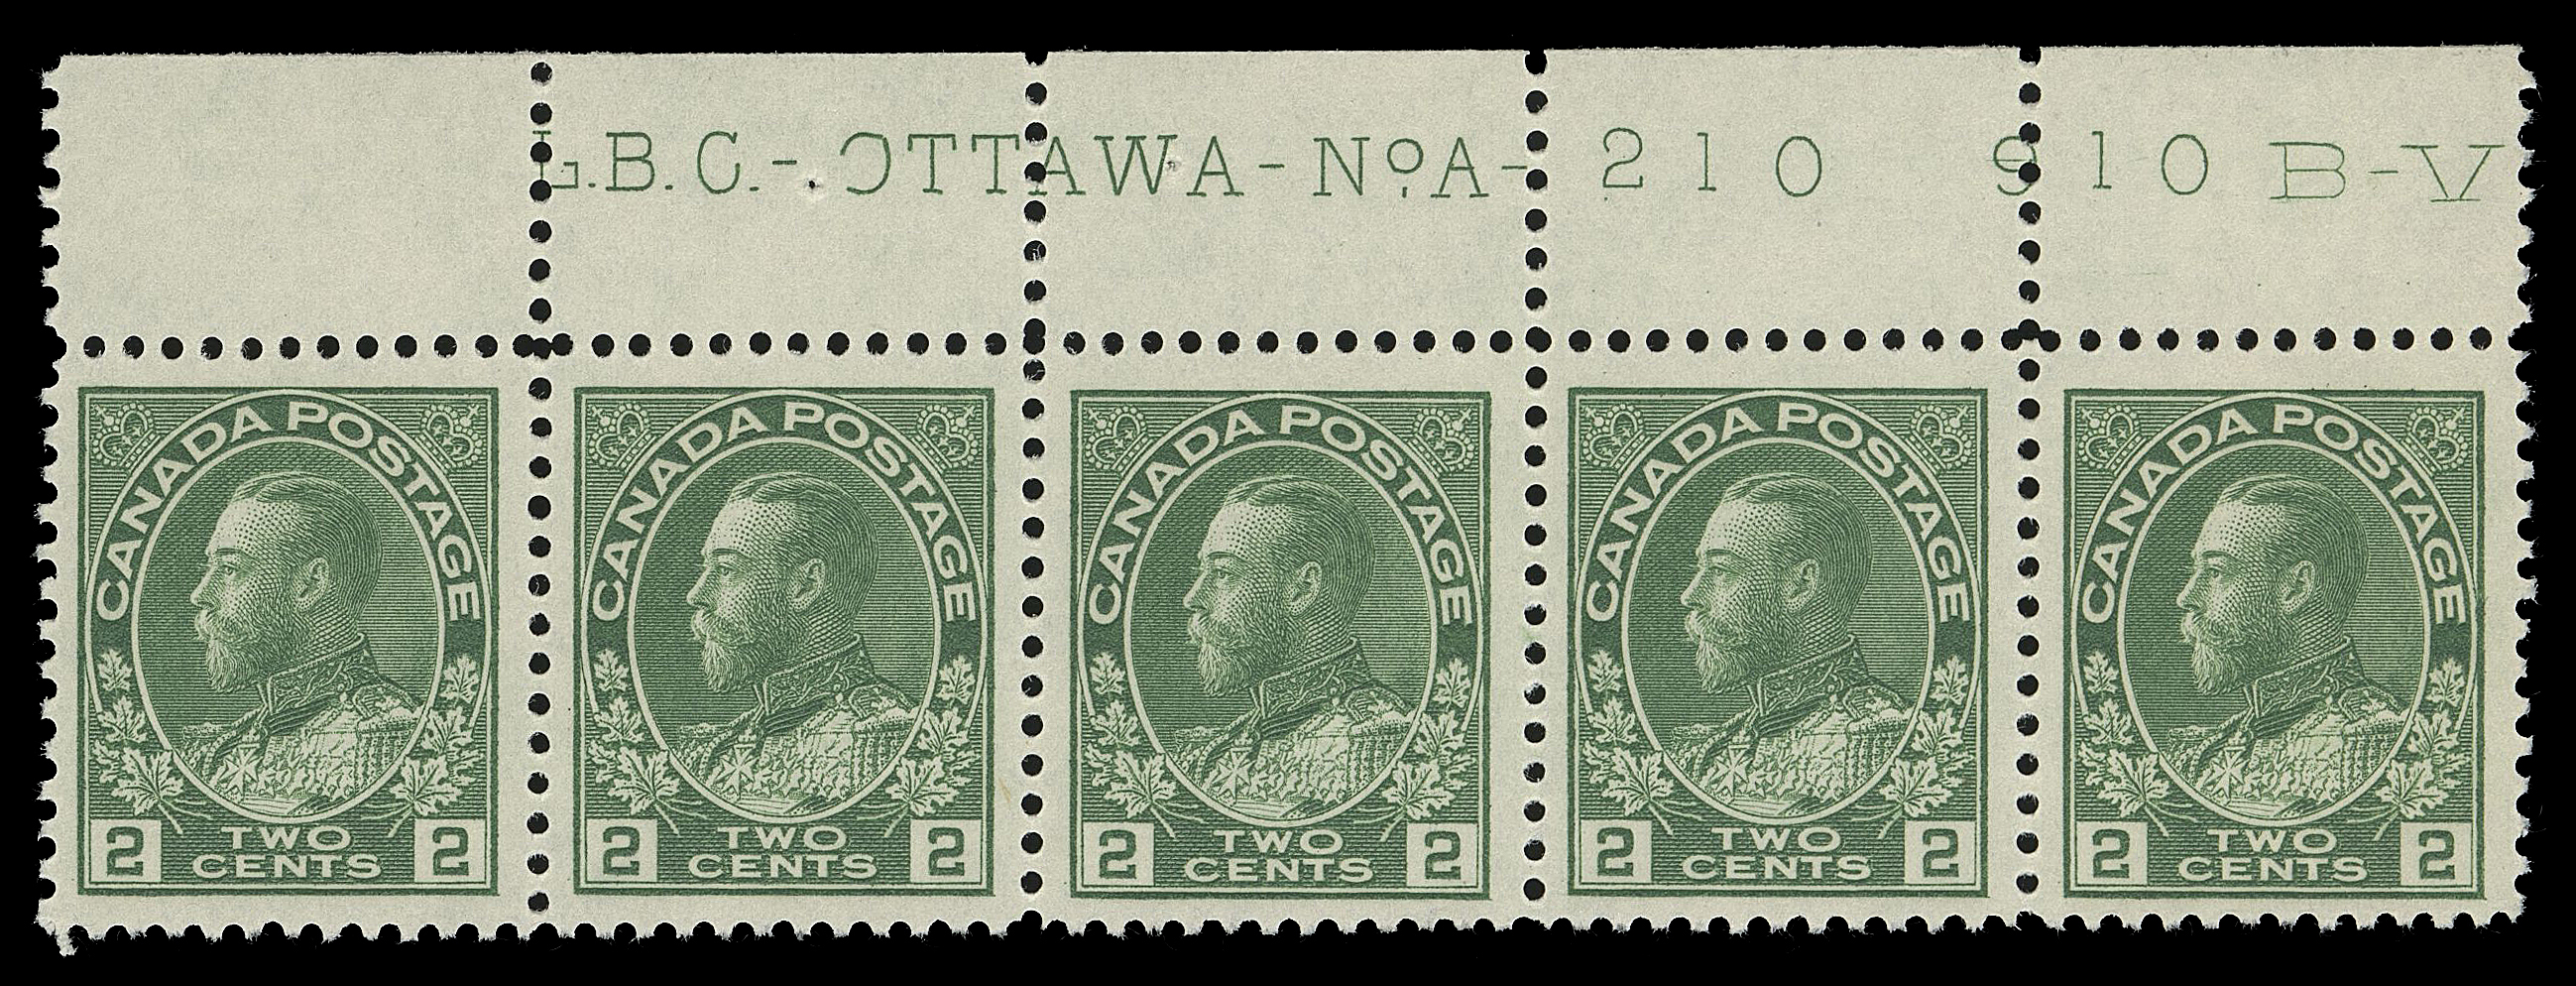 ADMIRAL STAMPS  107iv,A trio of consecutive plate number strips of five - UR Plate 209 with etched "P" at left of "L.B.C.", UL Plate 210 and UL Plate 211, fresh and F-VF NH (Unitrade cat. $1,155)